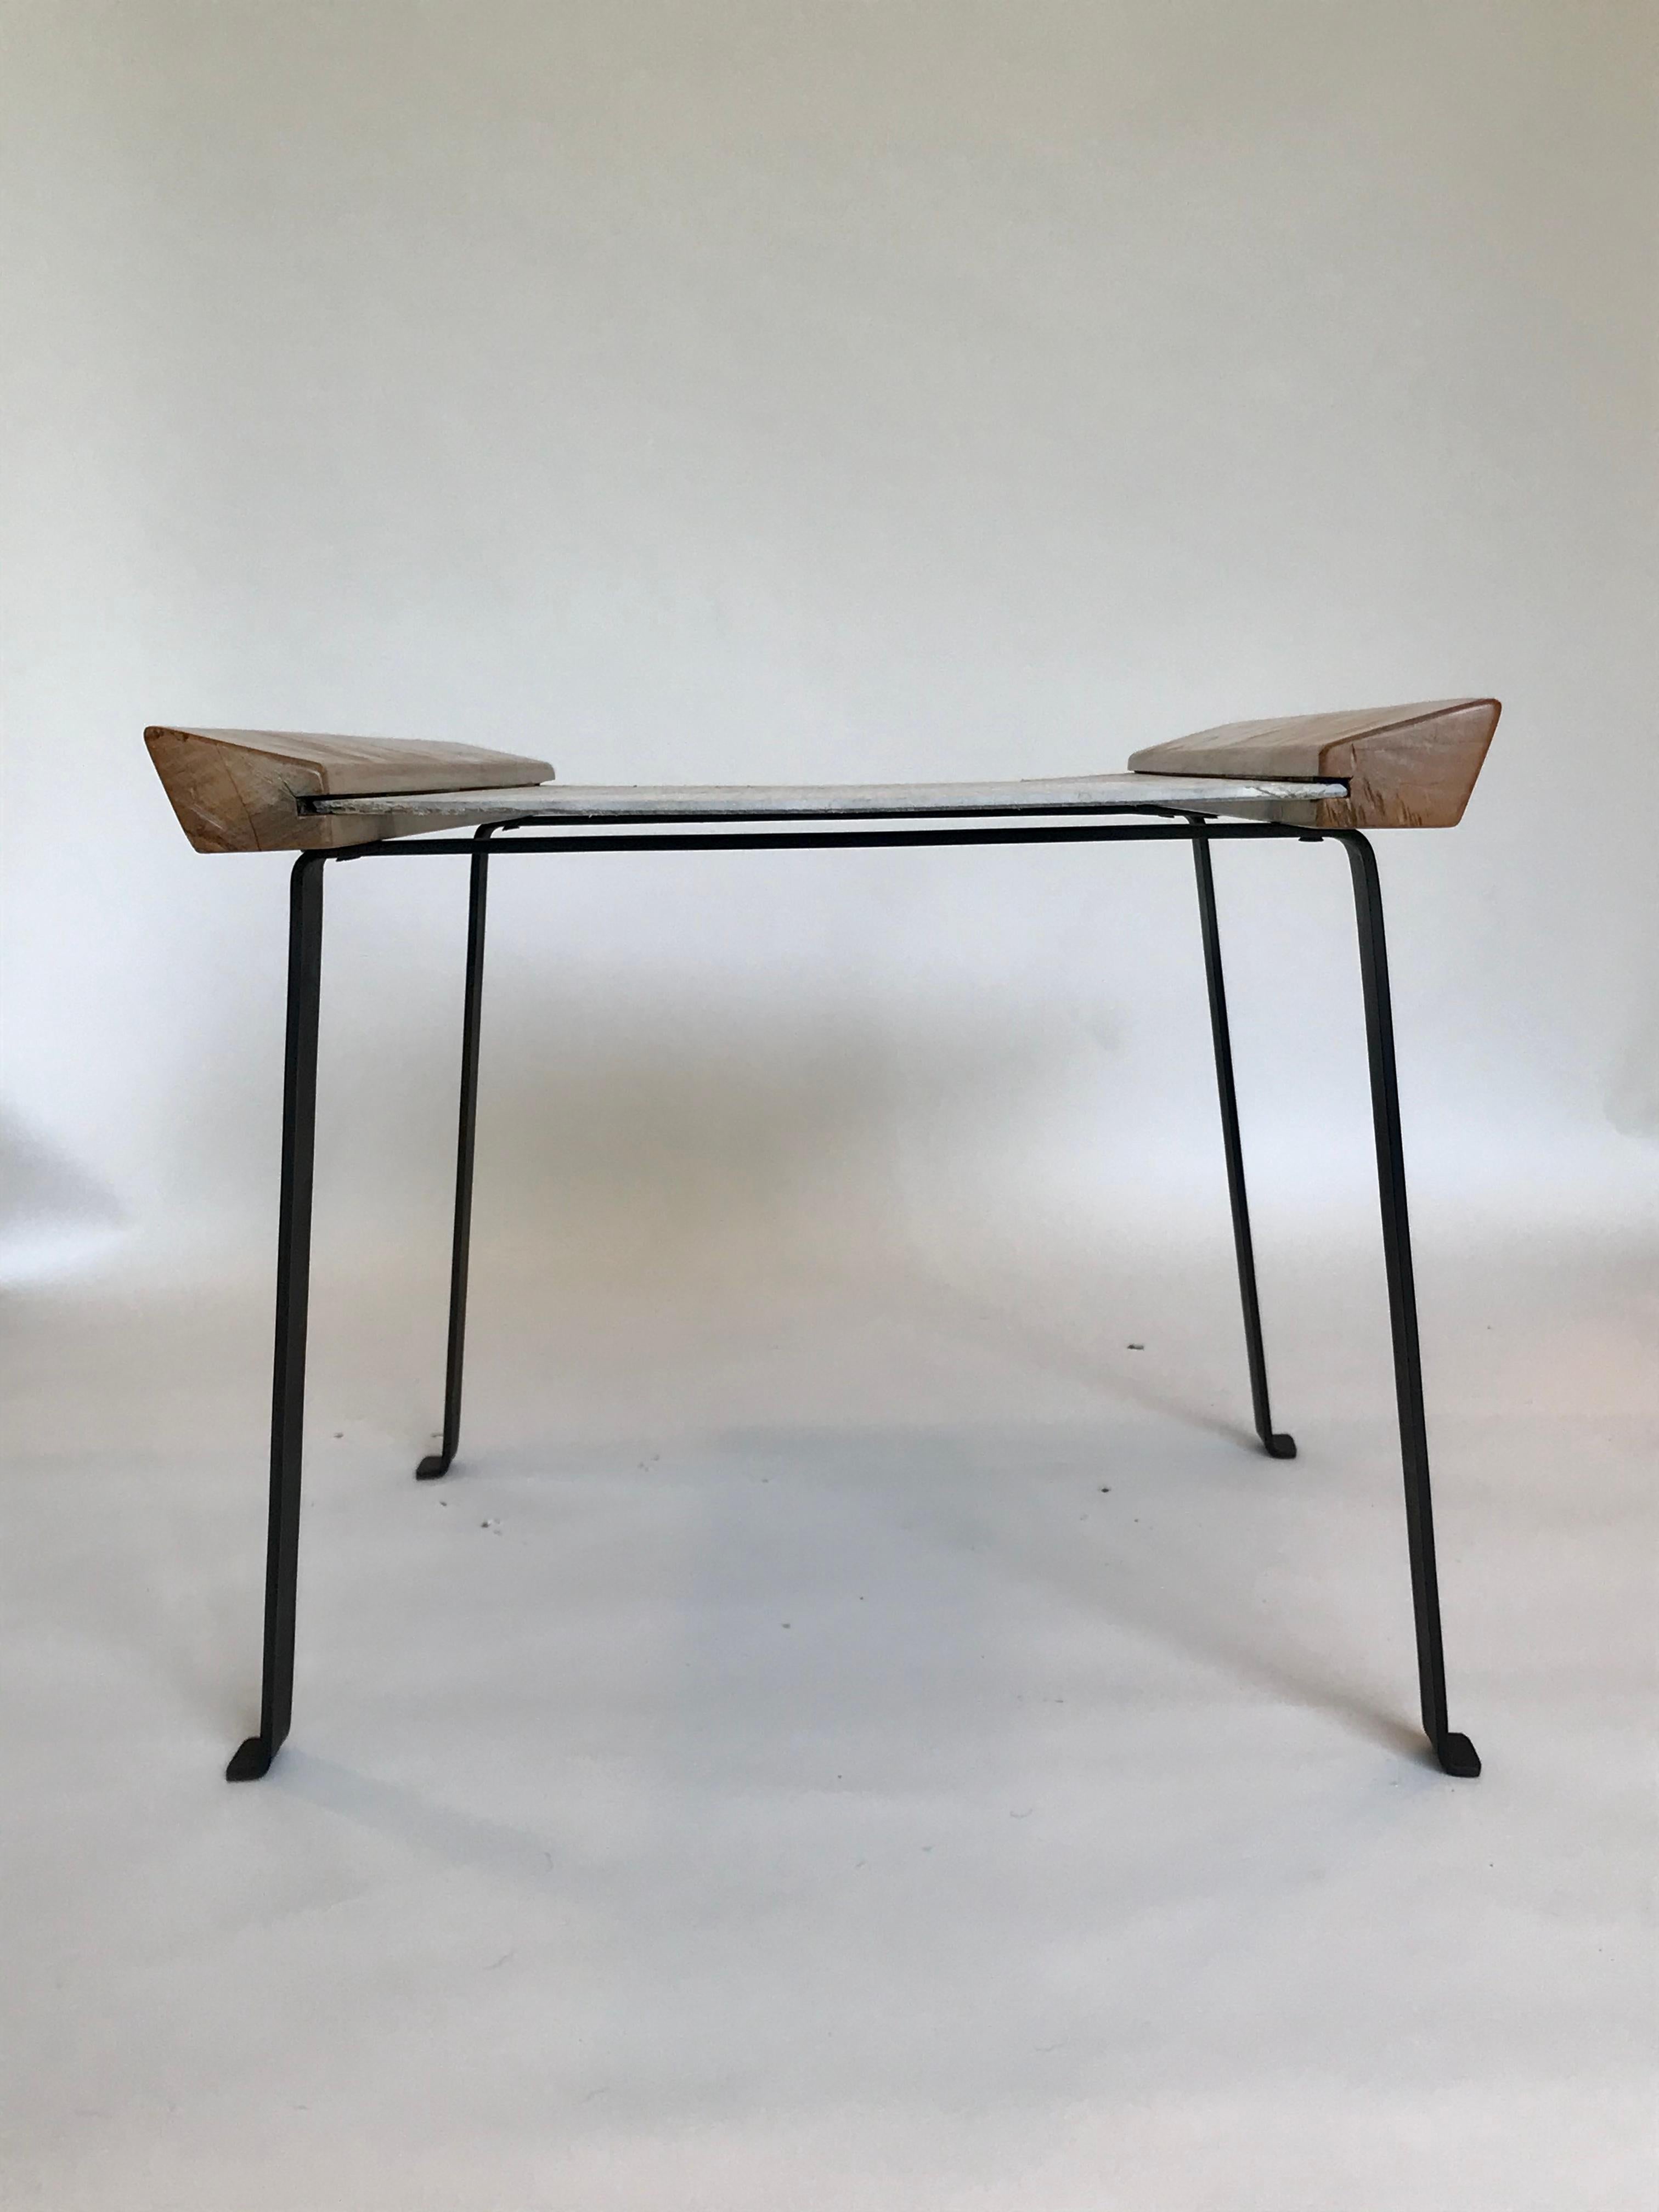 Rare table
Simple handmade pieces 
Iron, birch wood and pegboard
Nice form + function for any occasion and or collections 
Original condition showing normal wear
Small crack on one end of the top, patina on the wood, iron base is solid and